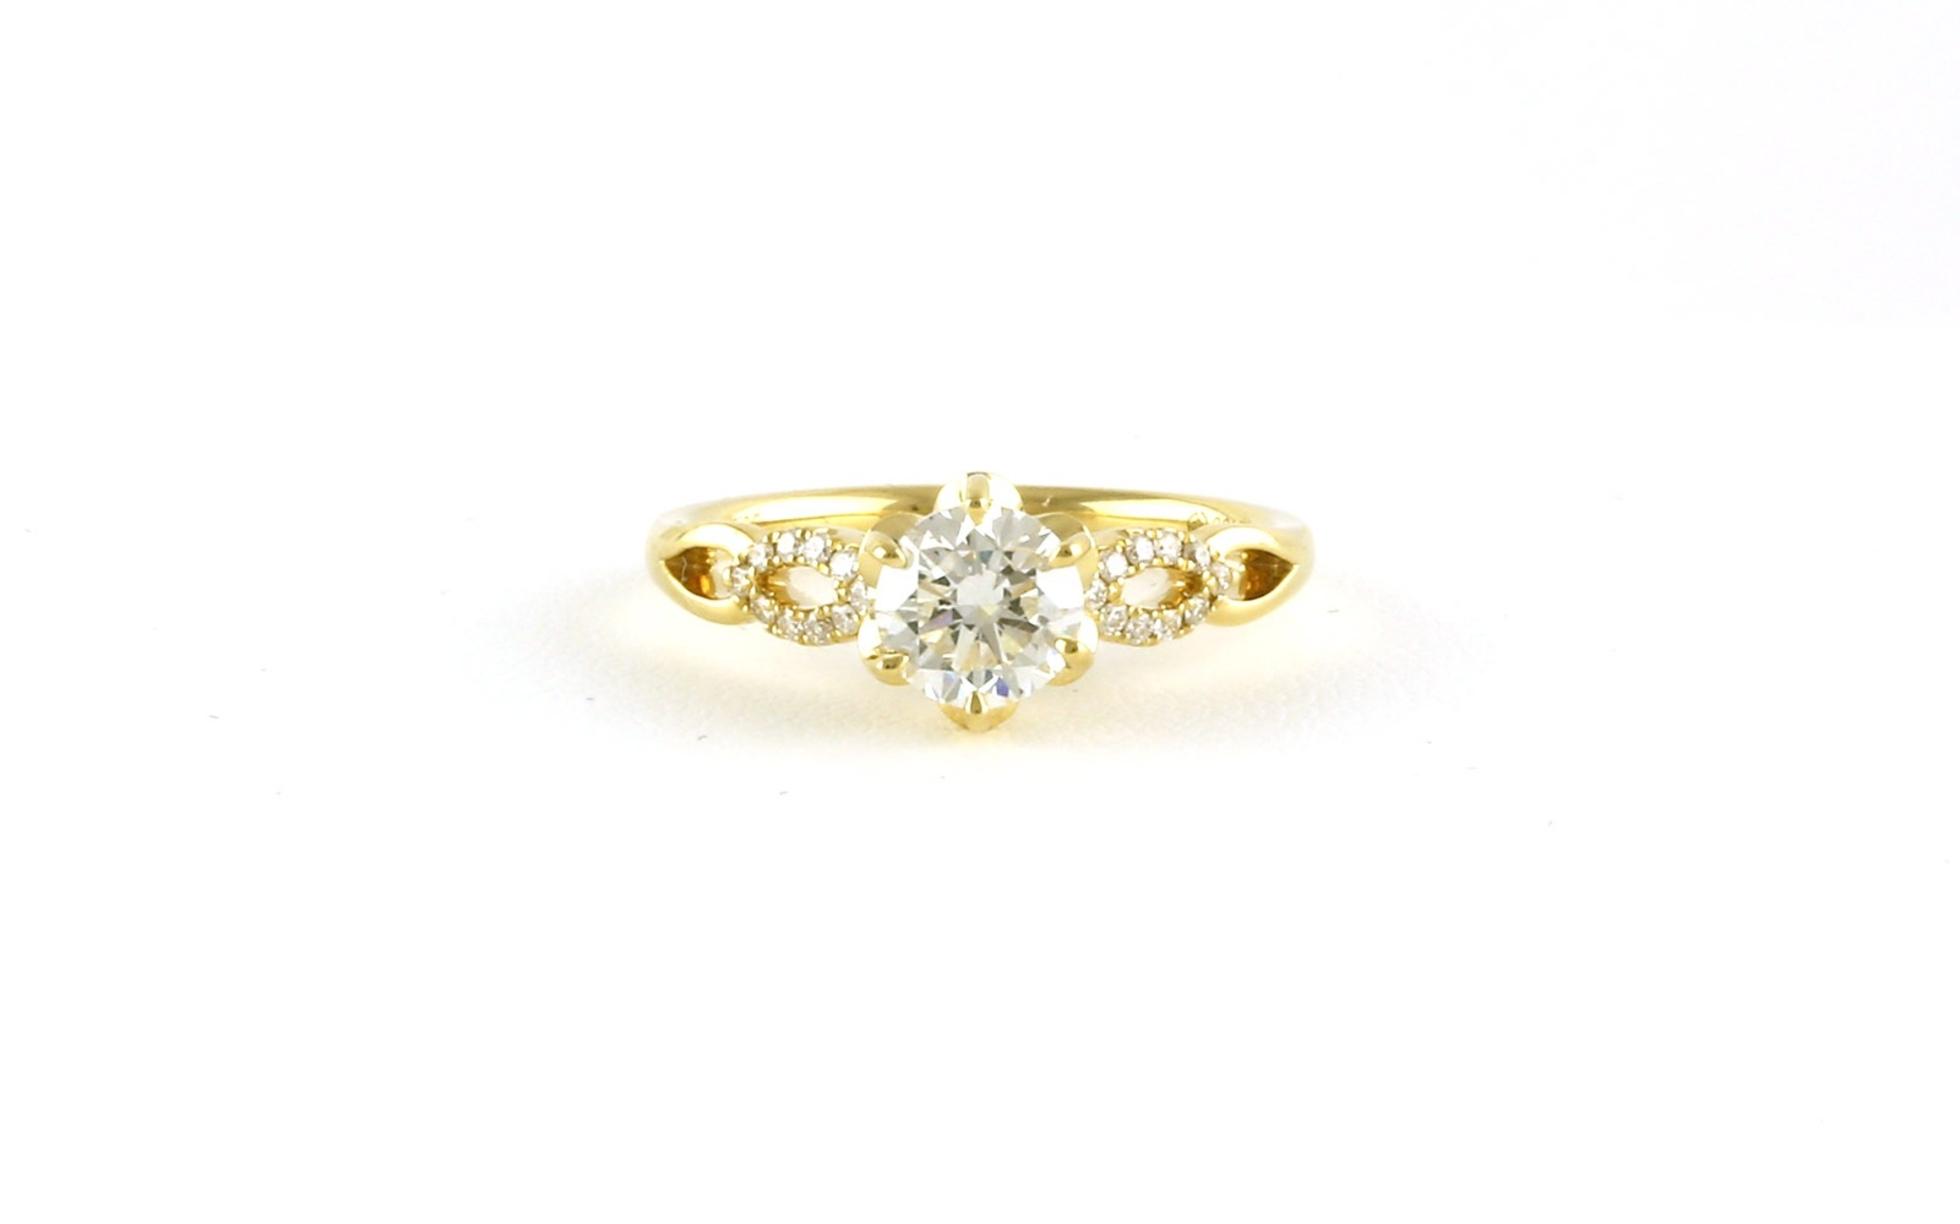 Woven Diamond Engagement Ring with Crown Prong Details in Yellow Gold (1.15cts TWT)